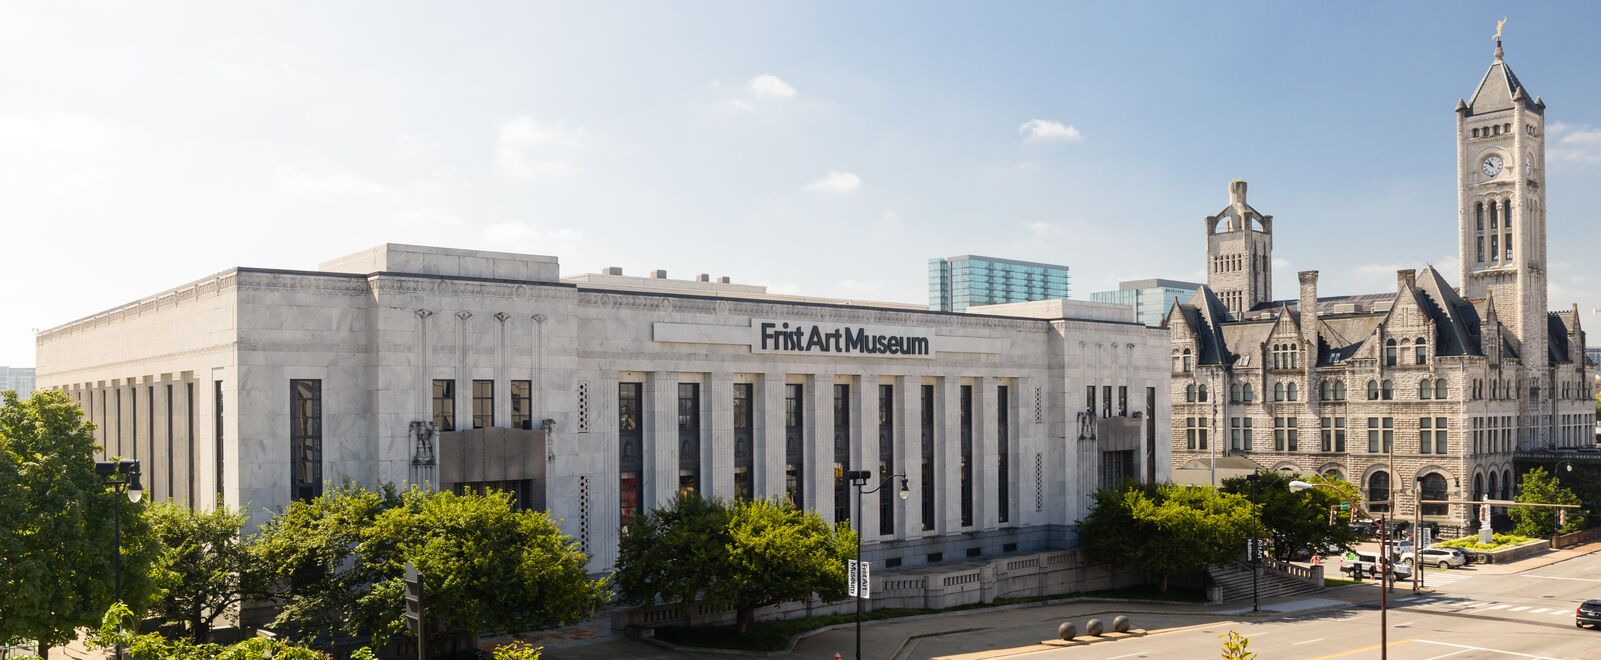 things to do in nashville - frist art gallery